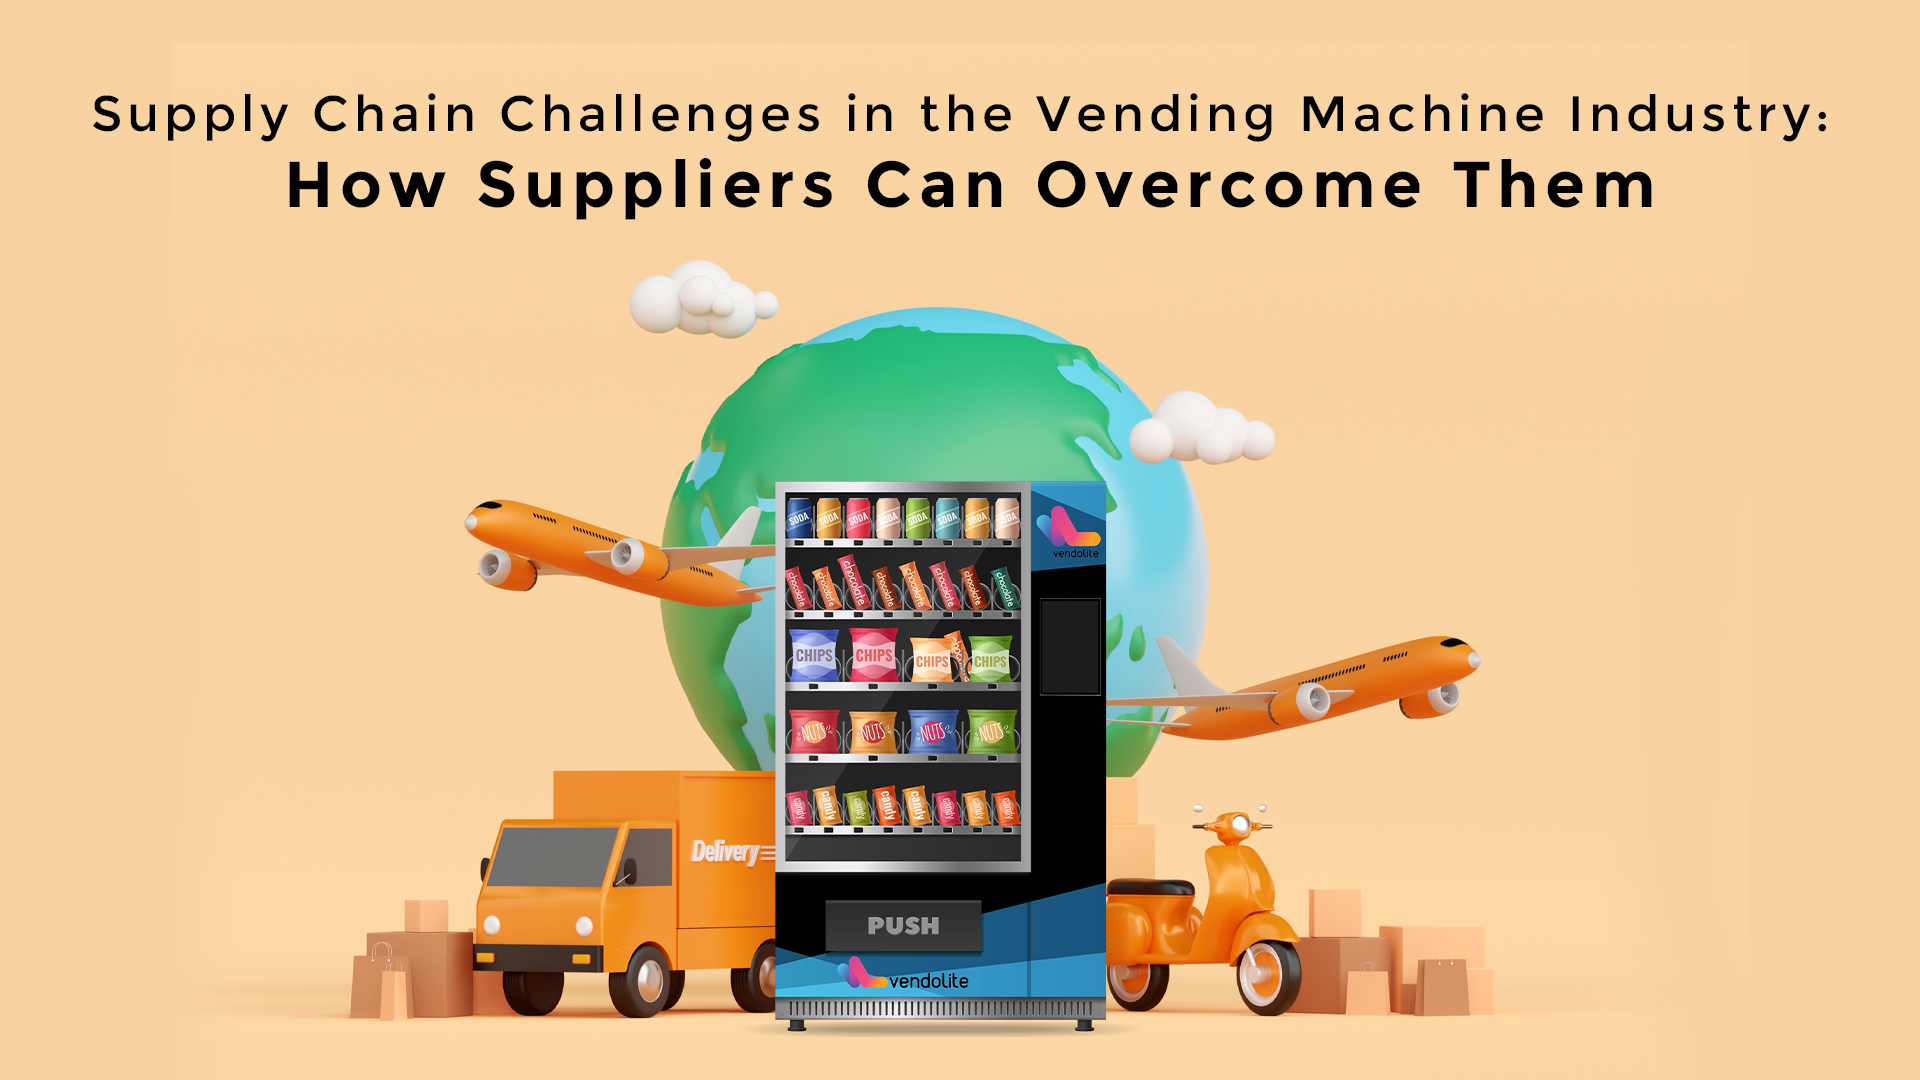 Supply Chain Challenges in the Vending Machine Industry: How Suppliers Can Overcome Them